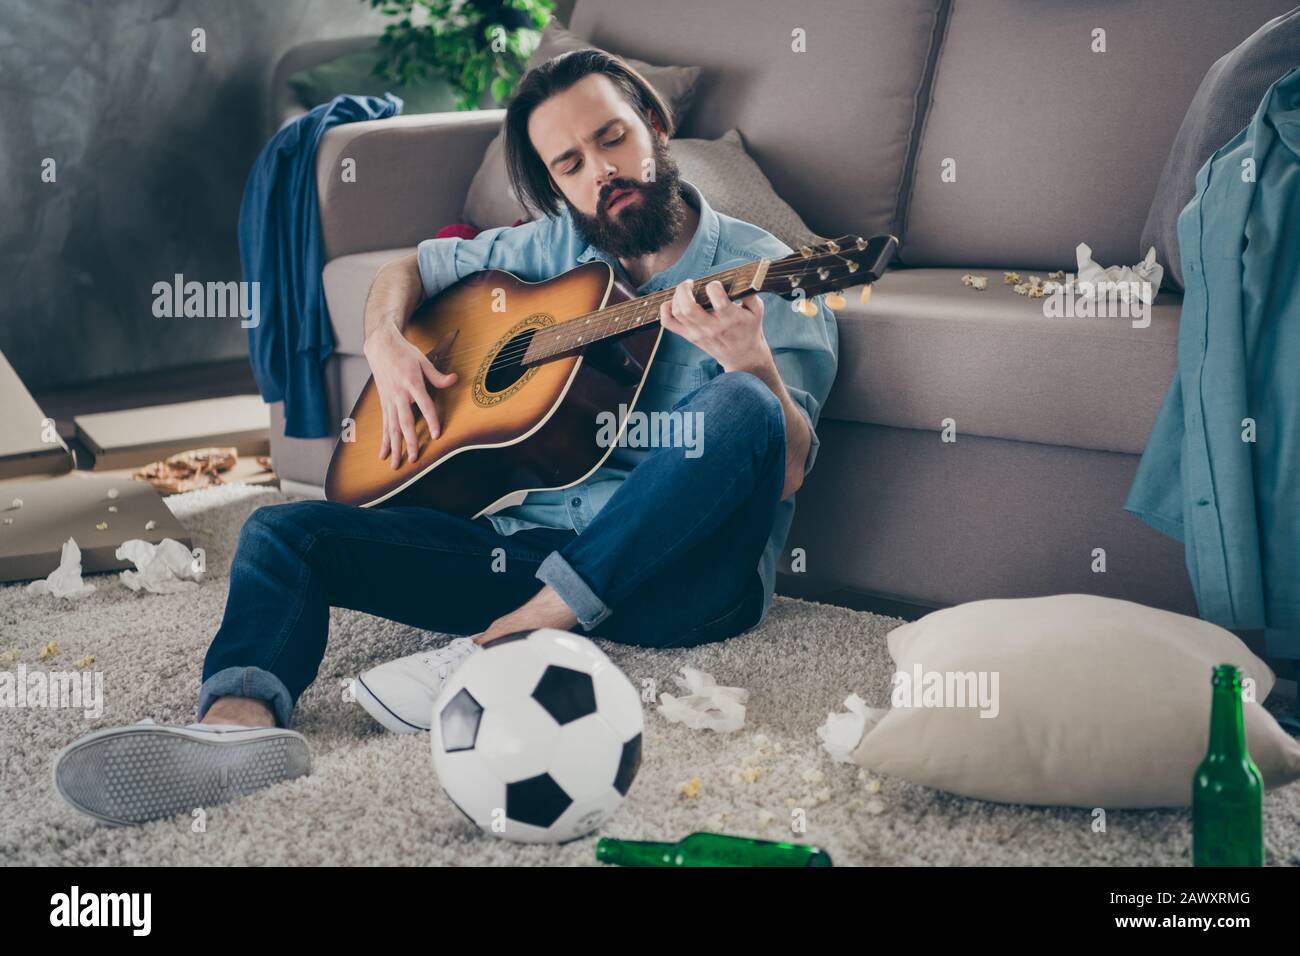 Photo of hipster guy with long beard sitting carpet near sofa holding guitar don't mind chaos after stag party messy dirty flat singing songs careless Stock Photo